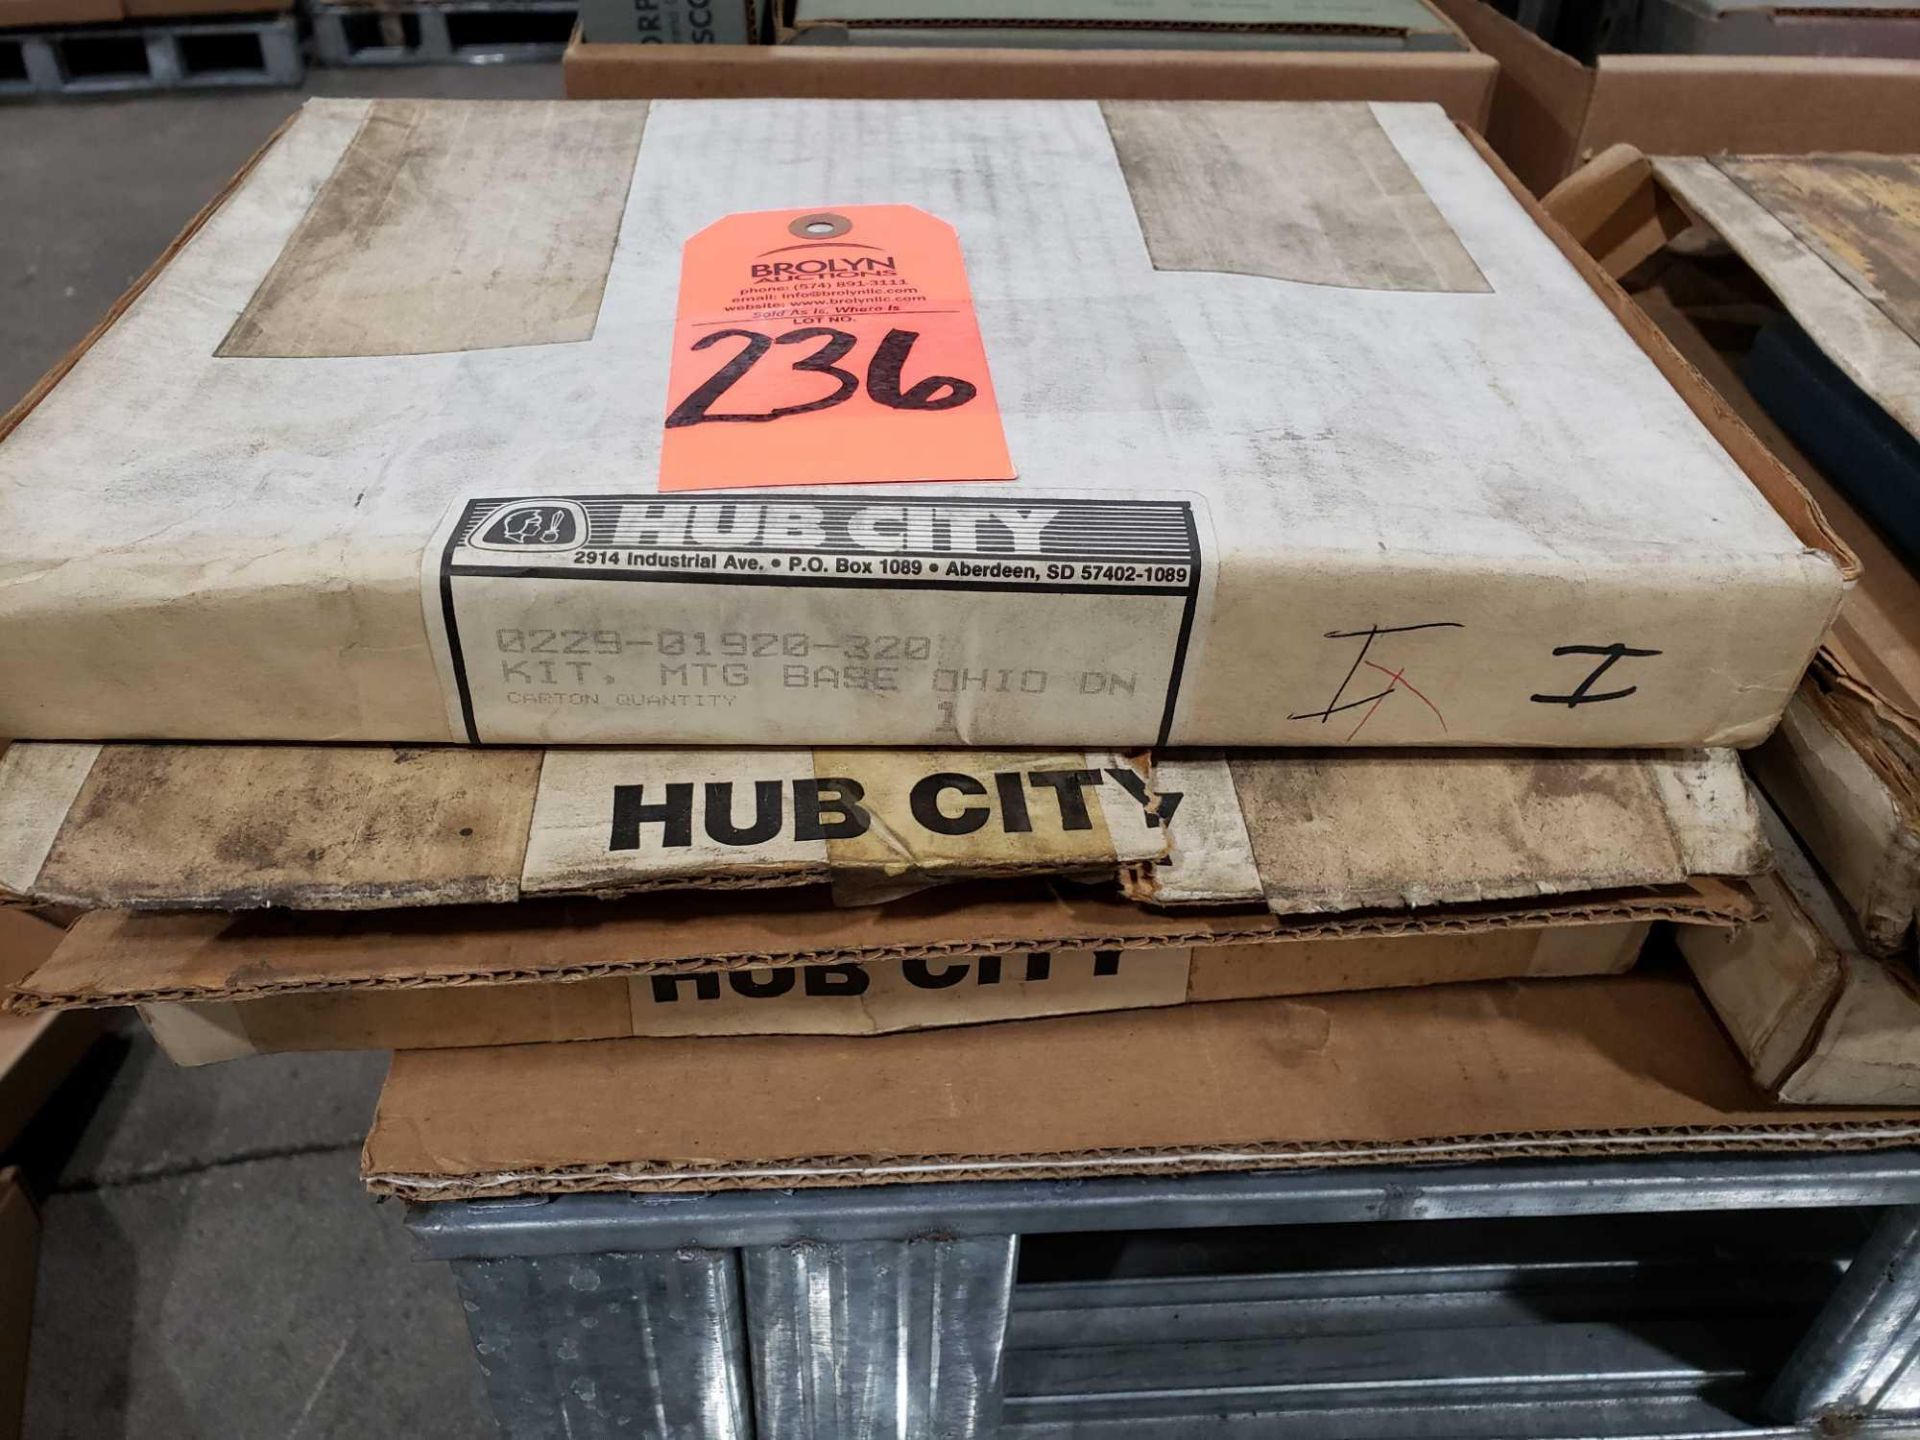 Qty 3 - Hub City model 0229-01920-320. New in boxes.